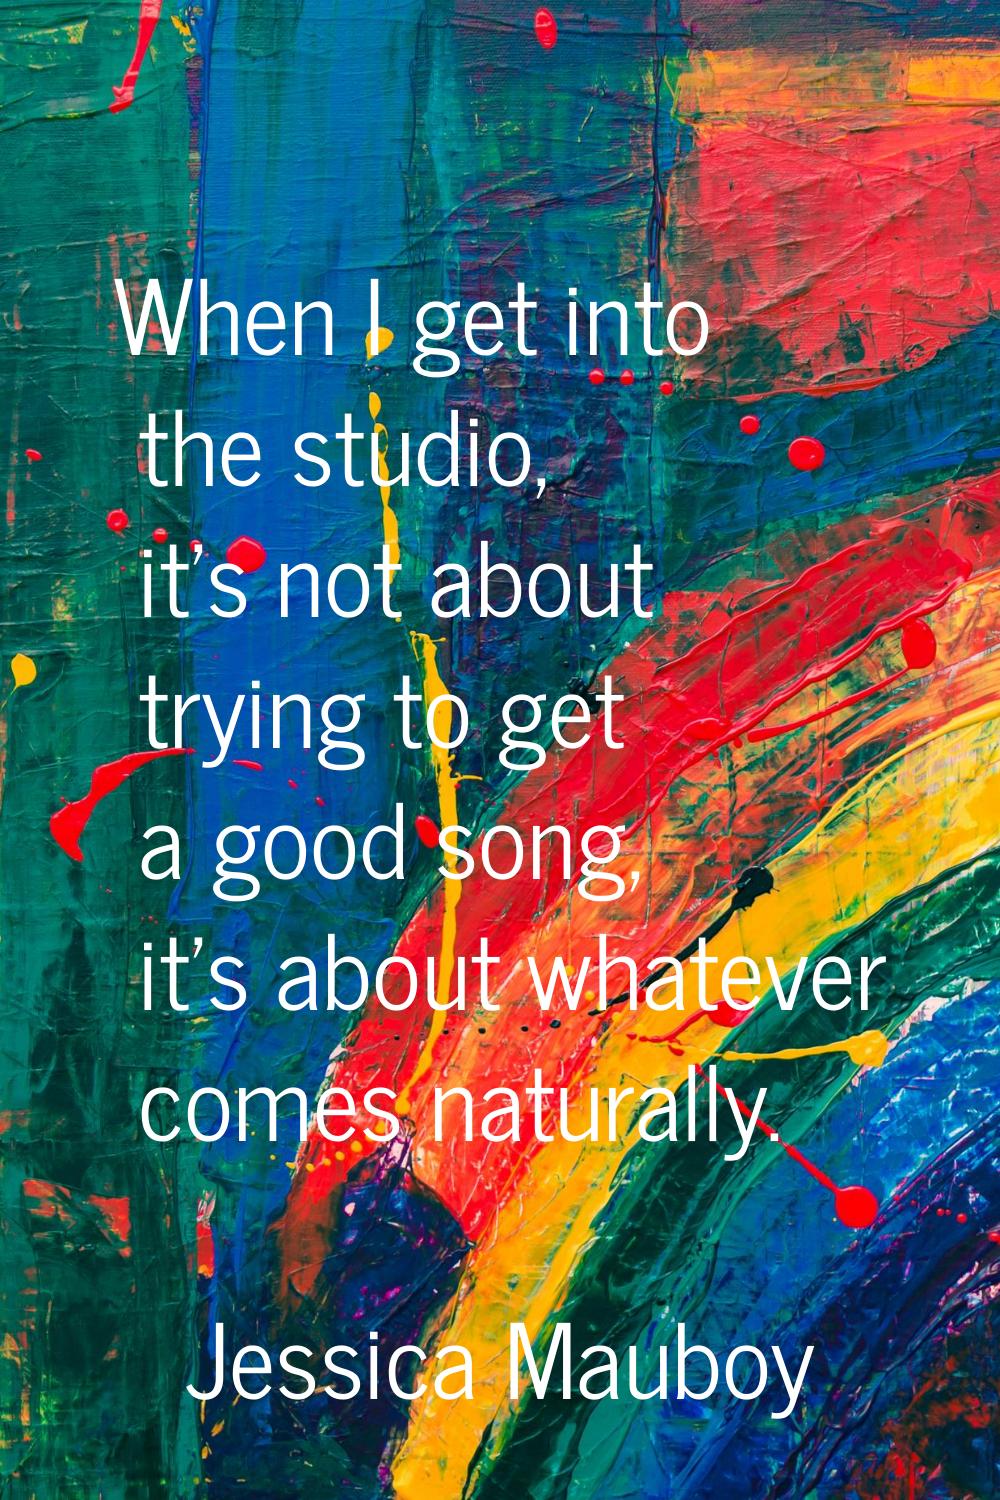 When I get into the studio, it's not about trying to get a good song, it's about whatever comes nat